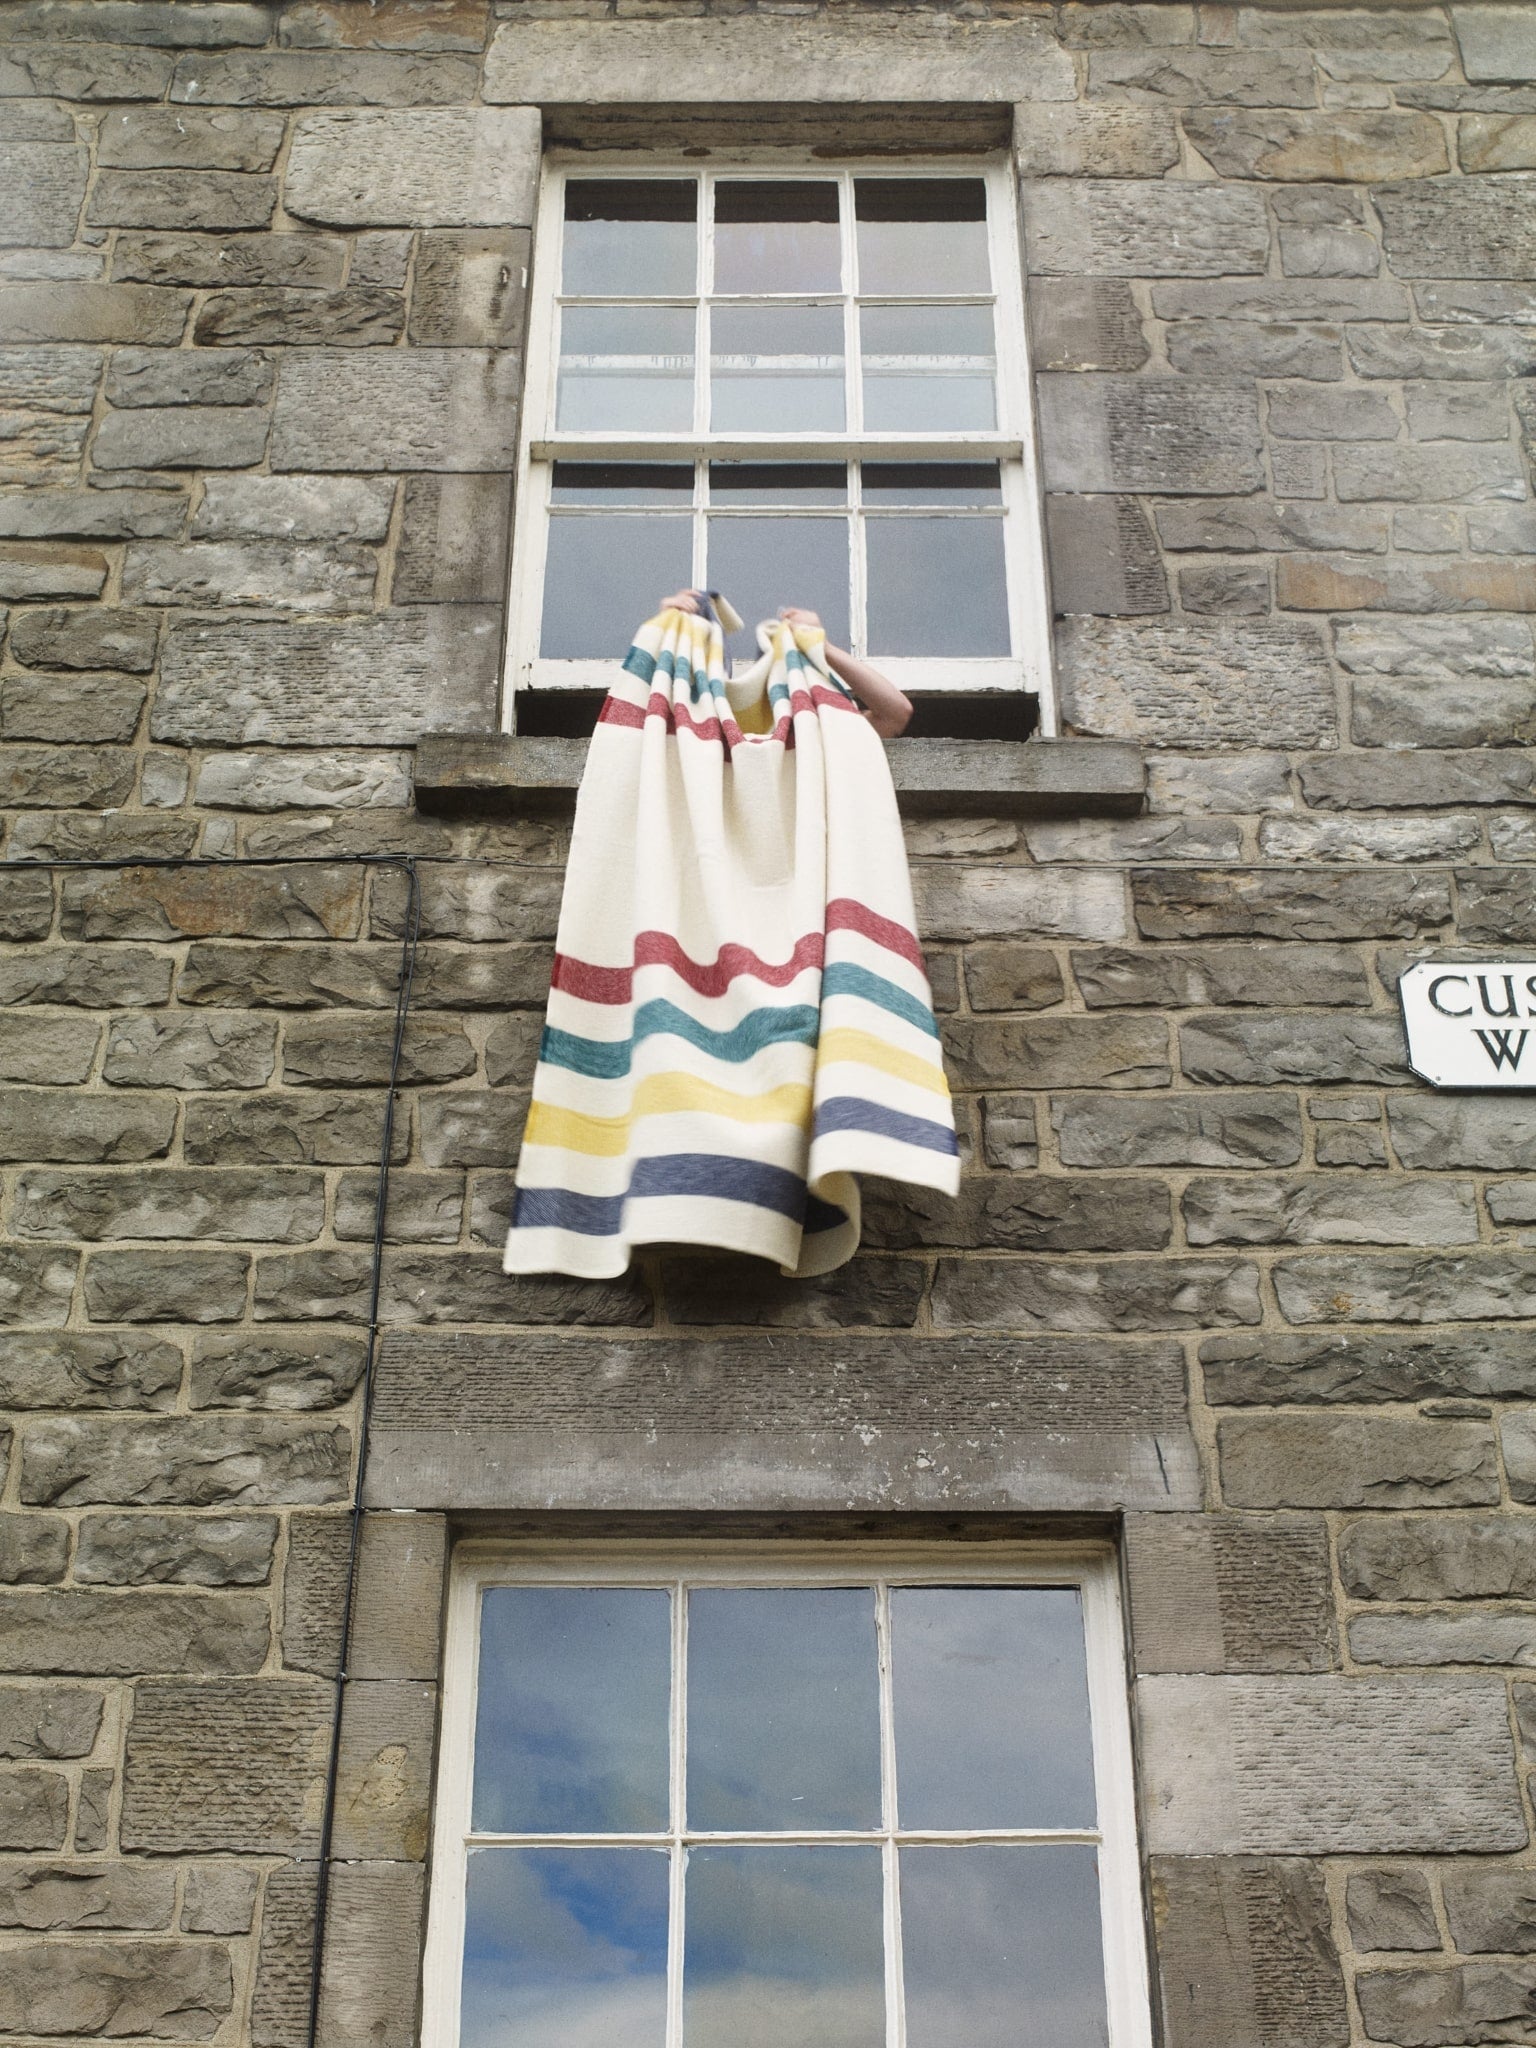 A multi coloured striped lambswool blanket is held out of the window of an old brick building. Customs Wharf, in Leith, Edinburgh.